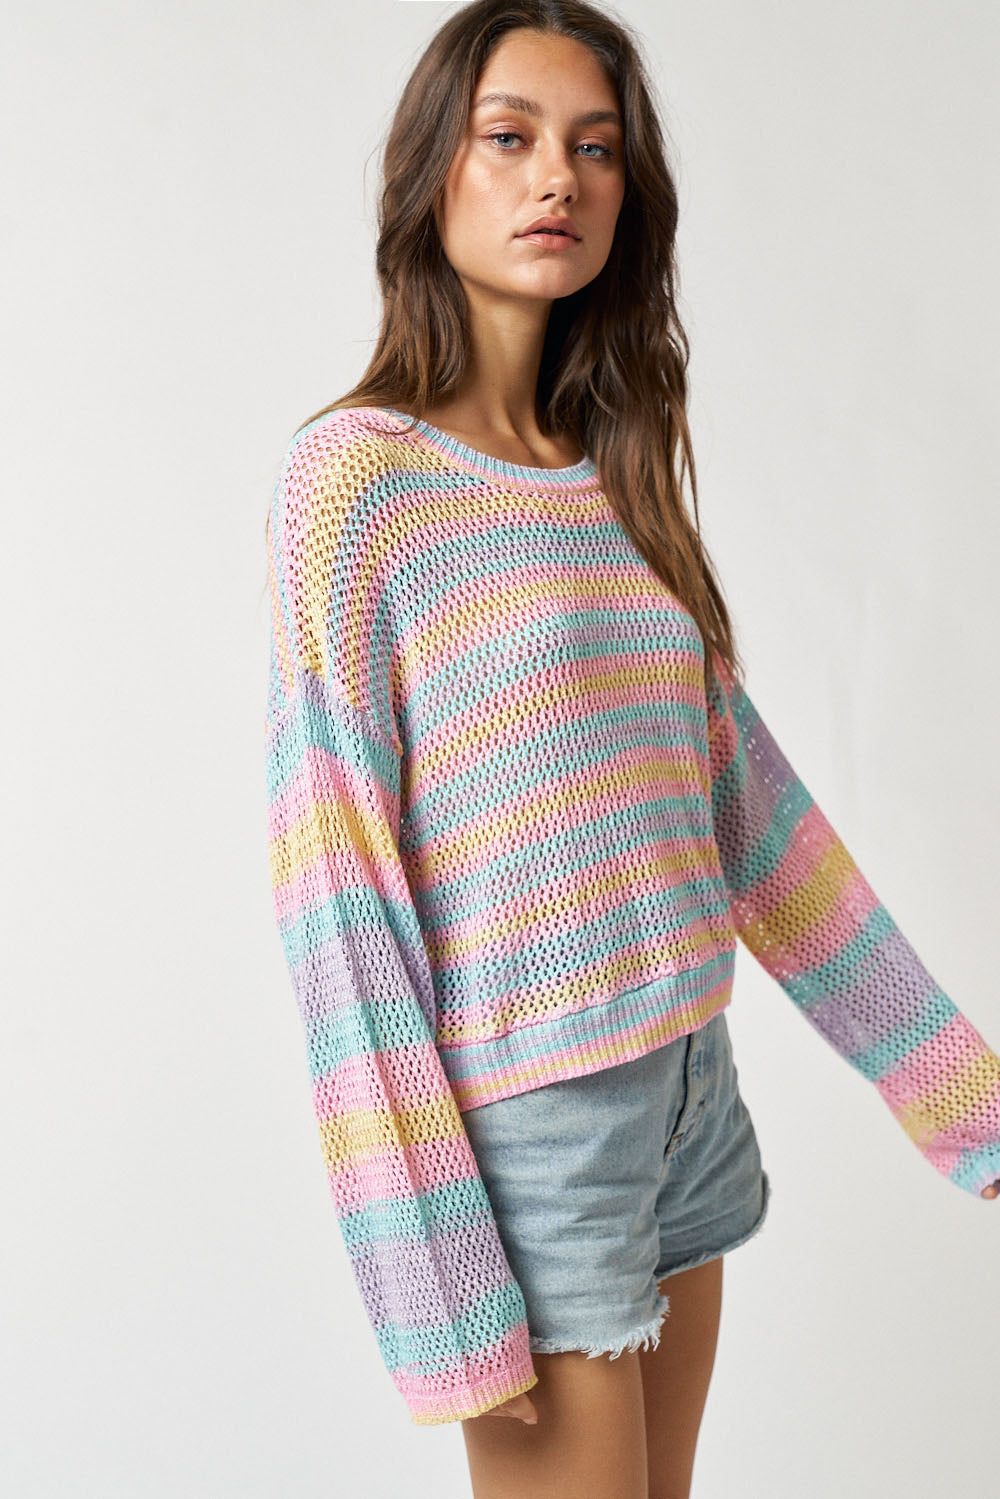 Rainbow Cover Up Sweater Top